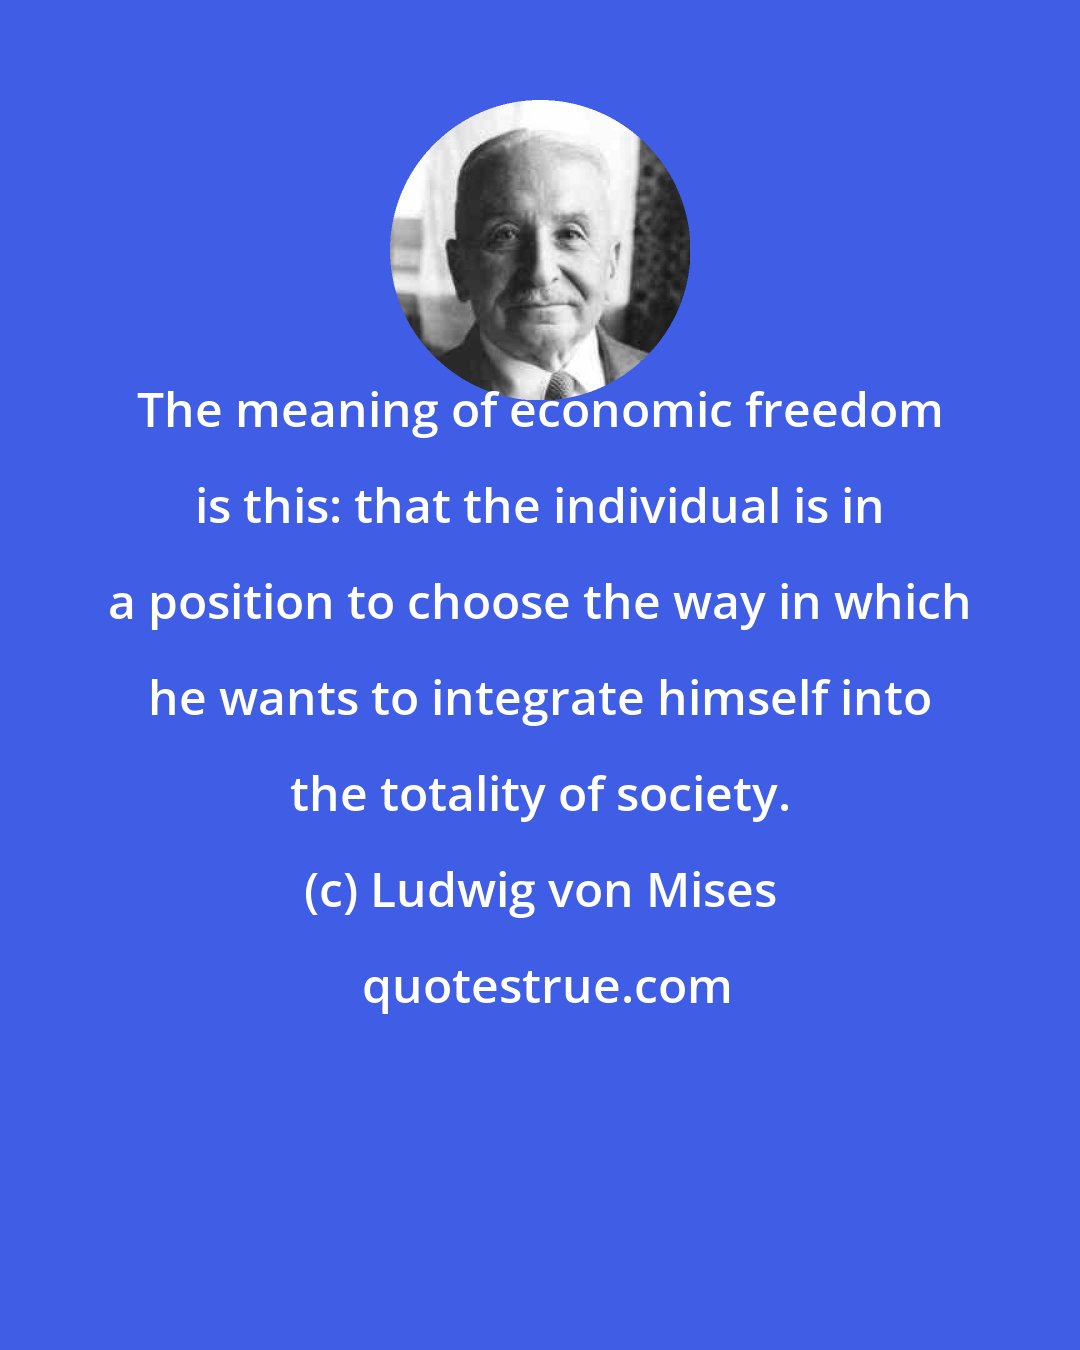 Ludwig von Mises: The meaning of economic freedom is this: that the individual is in a position to choose the way in which he wants to integrate himself into the totality of society.